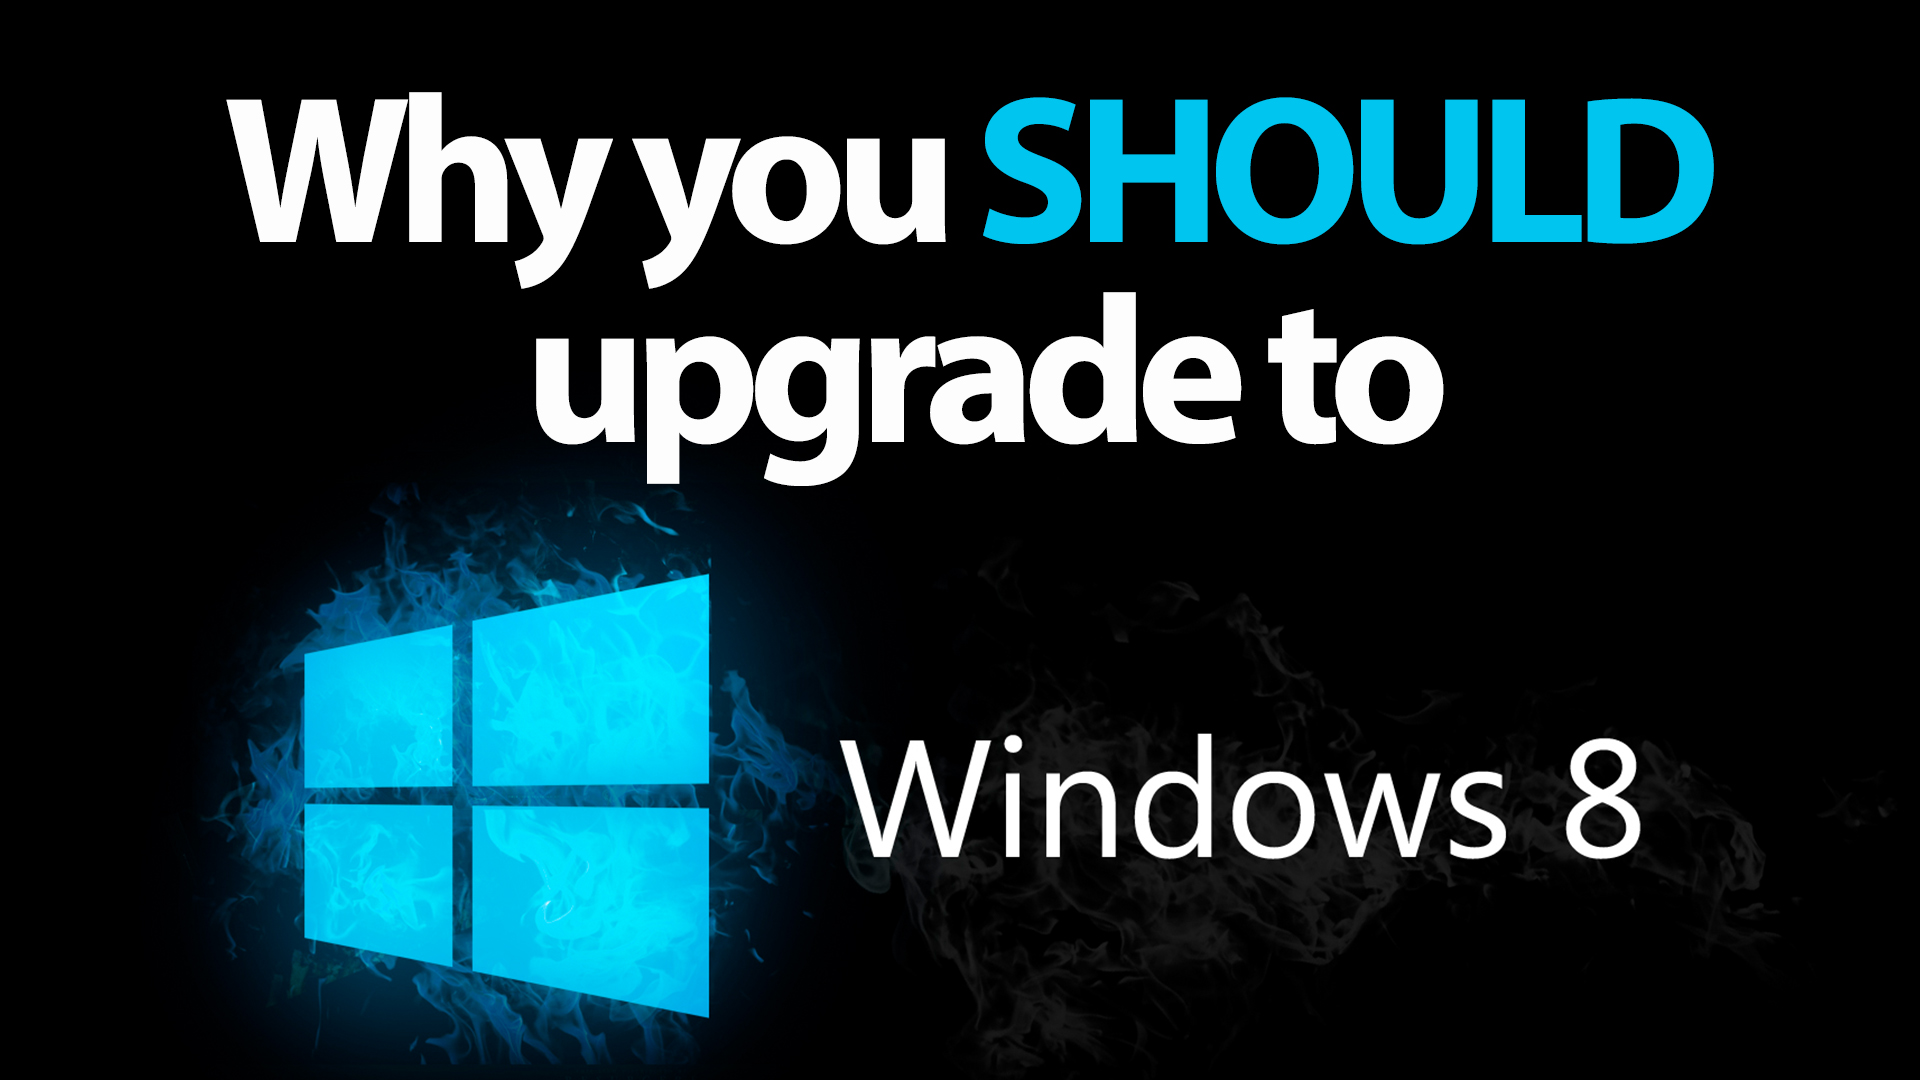 Why You Should Upgrade to Windows 8